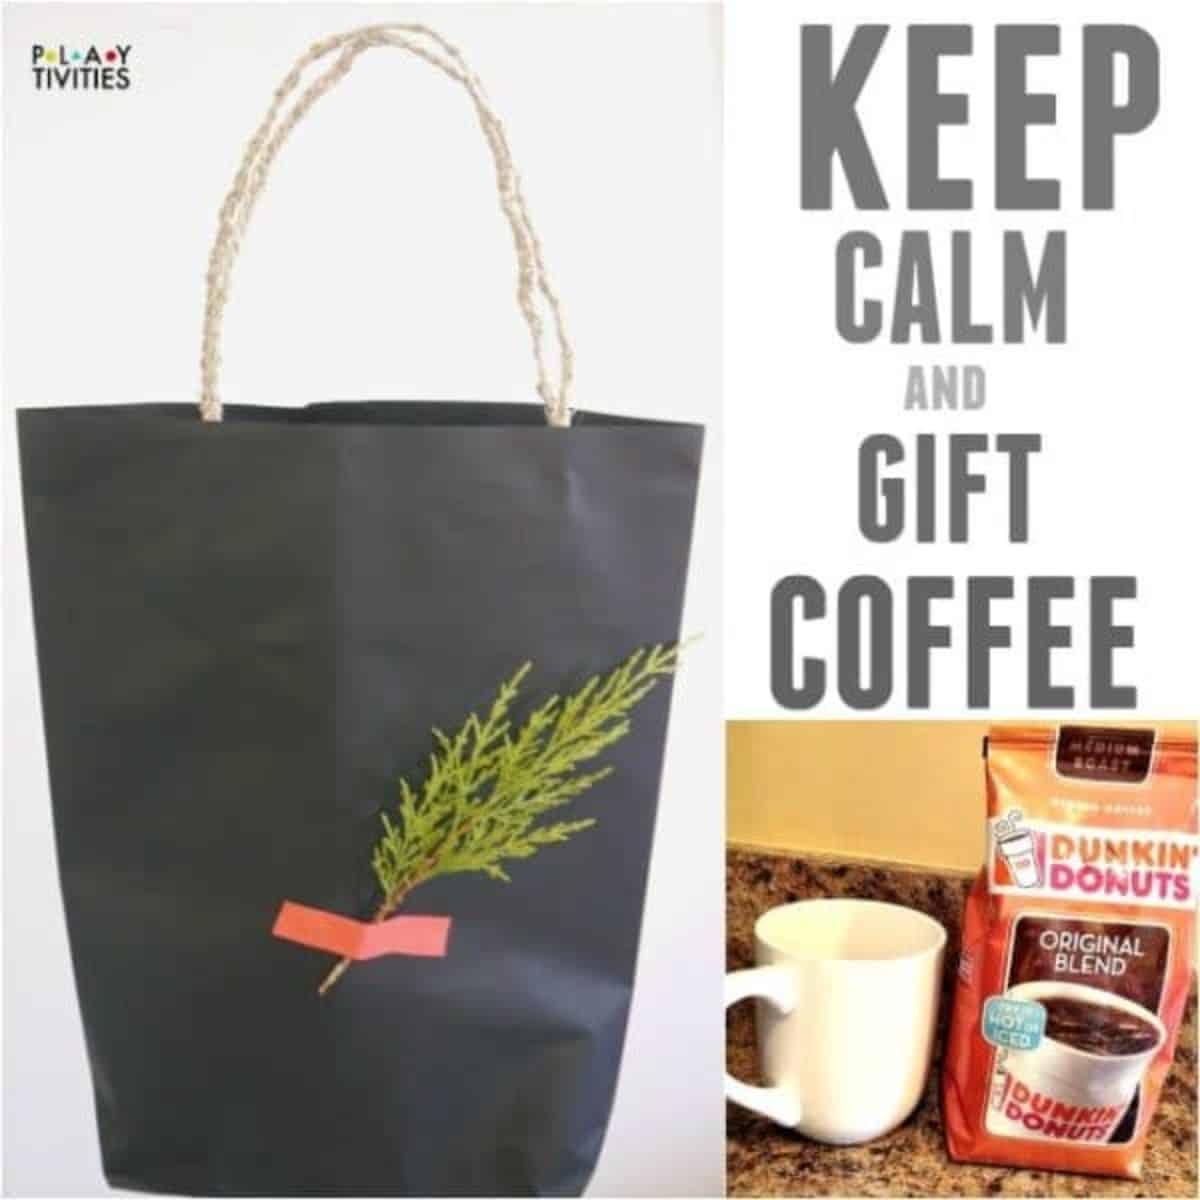 2 images of coffee gift christmas idea.